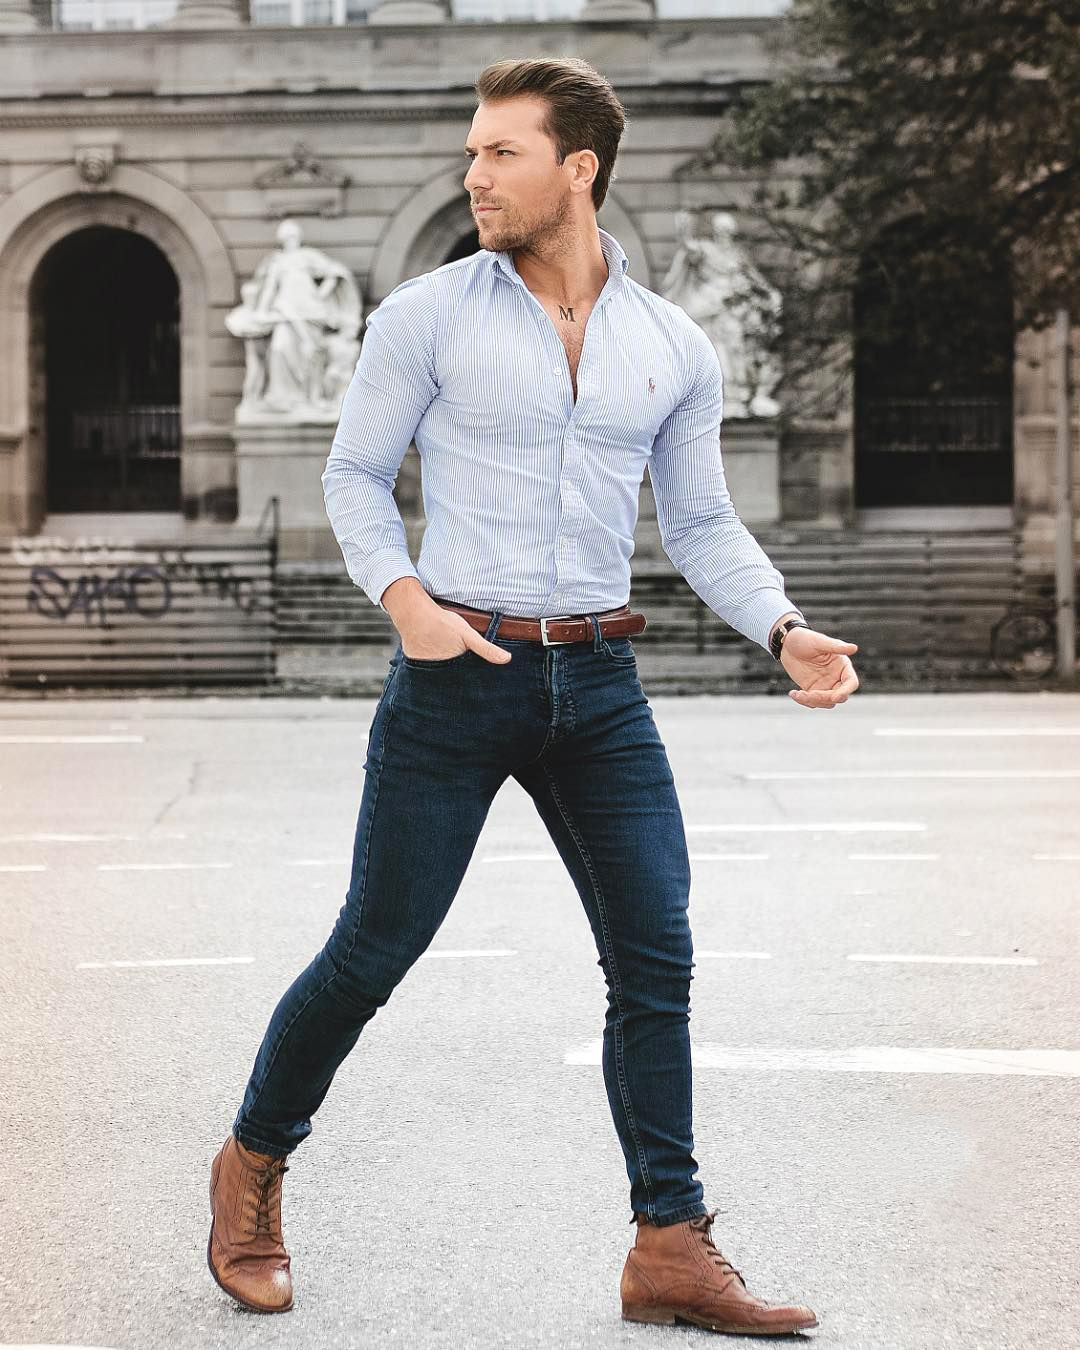 Grey Denim Shirt with Jeans Outfits For Men (26 ideas & outfits) | Lookastic